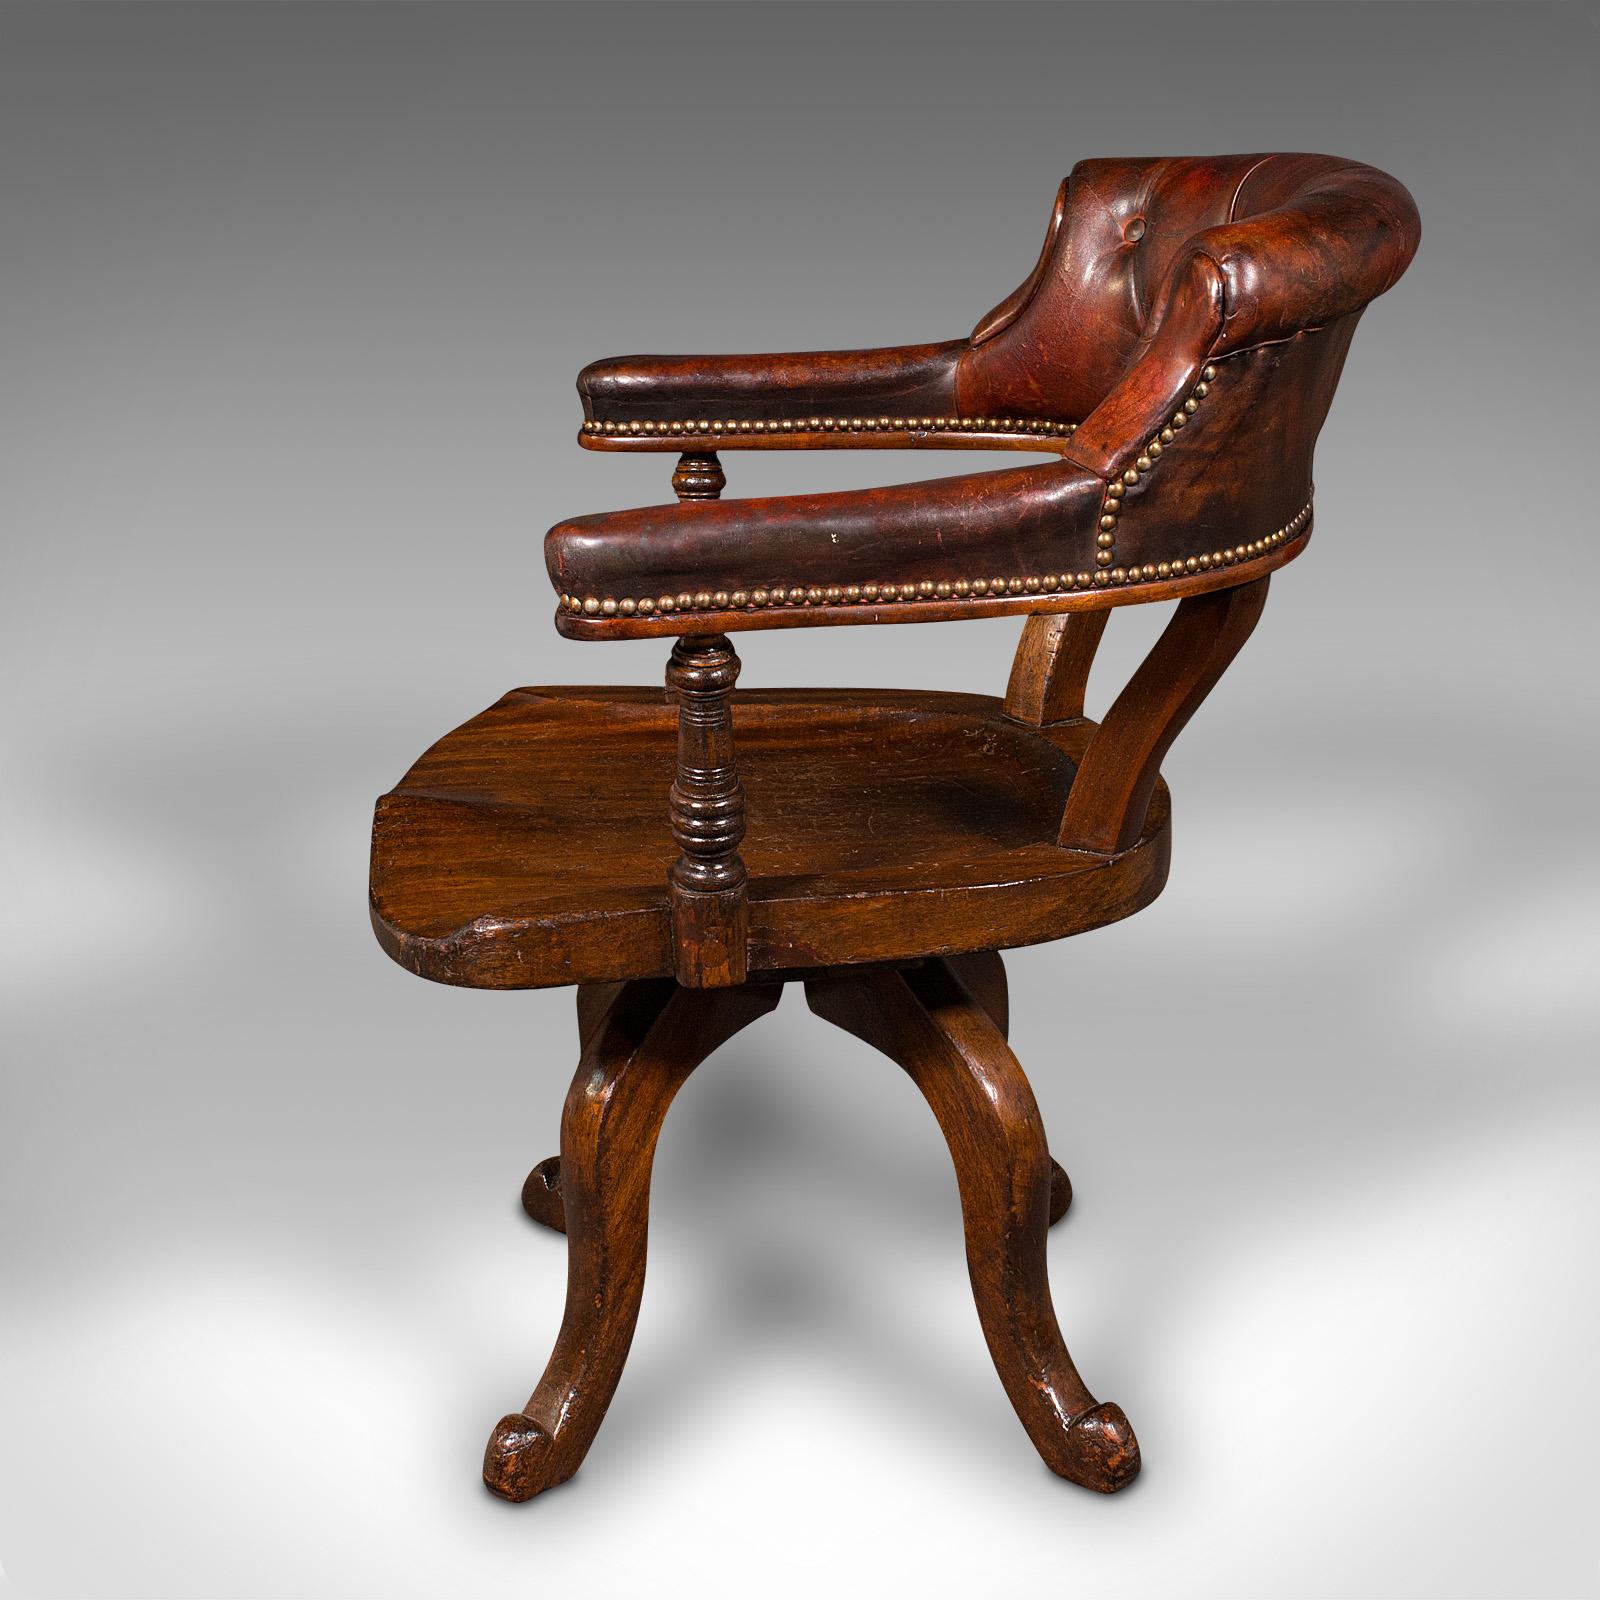 19th Century Antique Porter's Hall Chair, English, Leather, Rotary Desk Seat, Victorian, 1880 For Sale